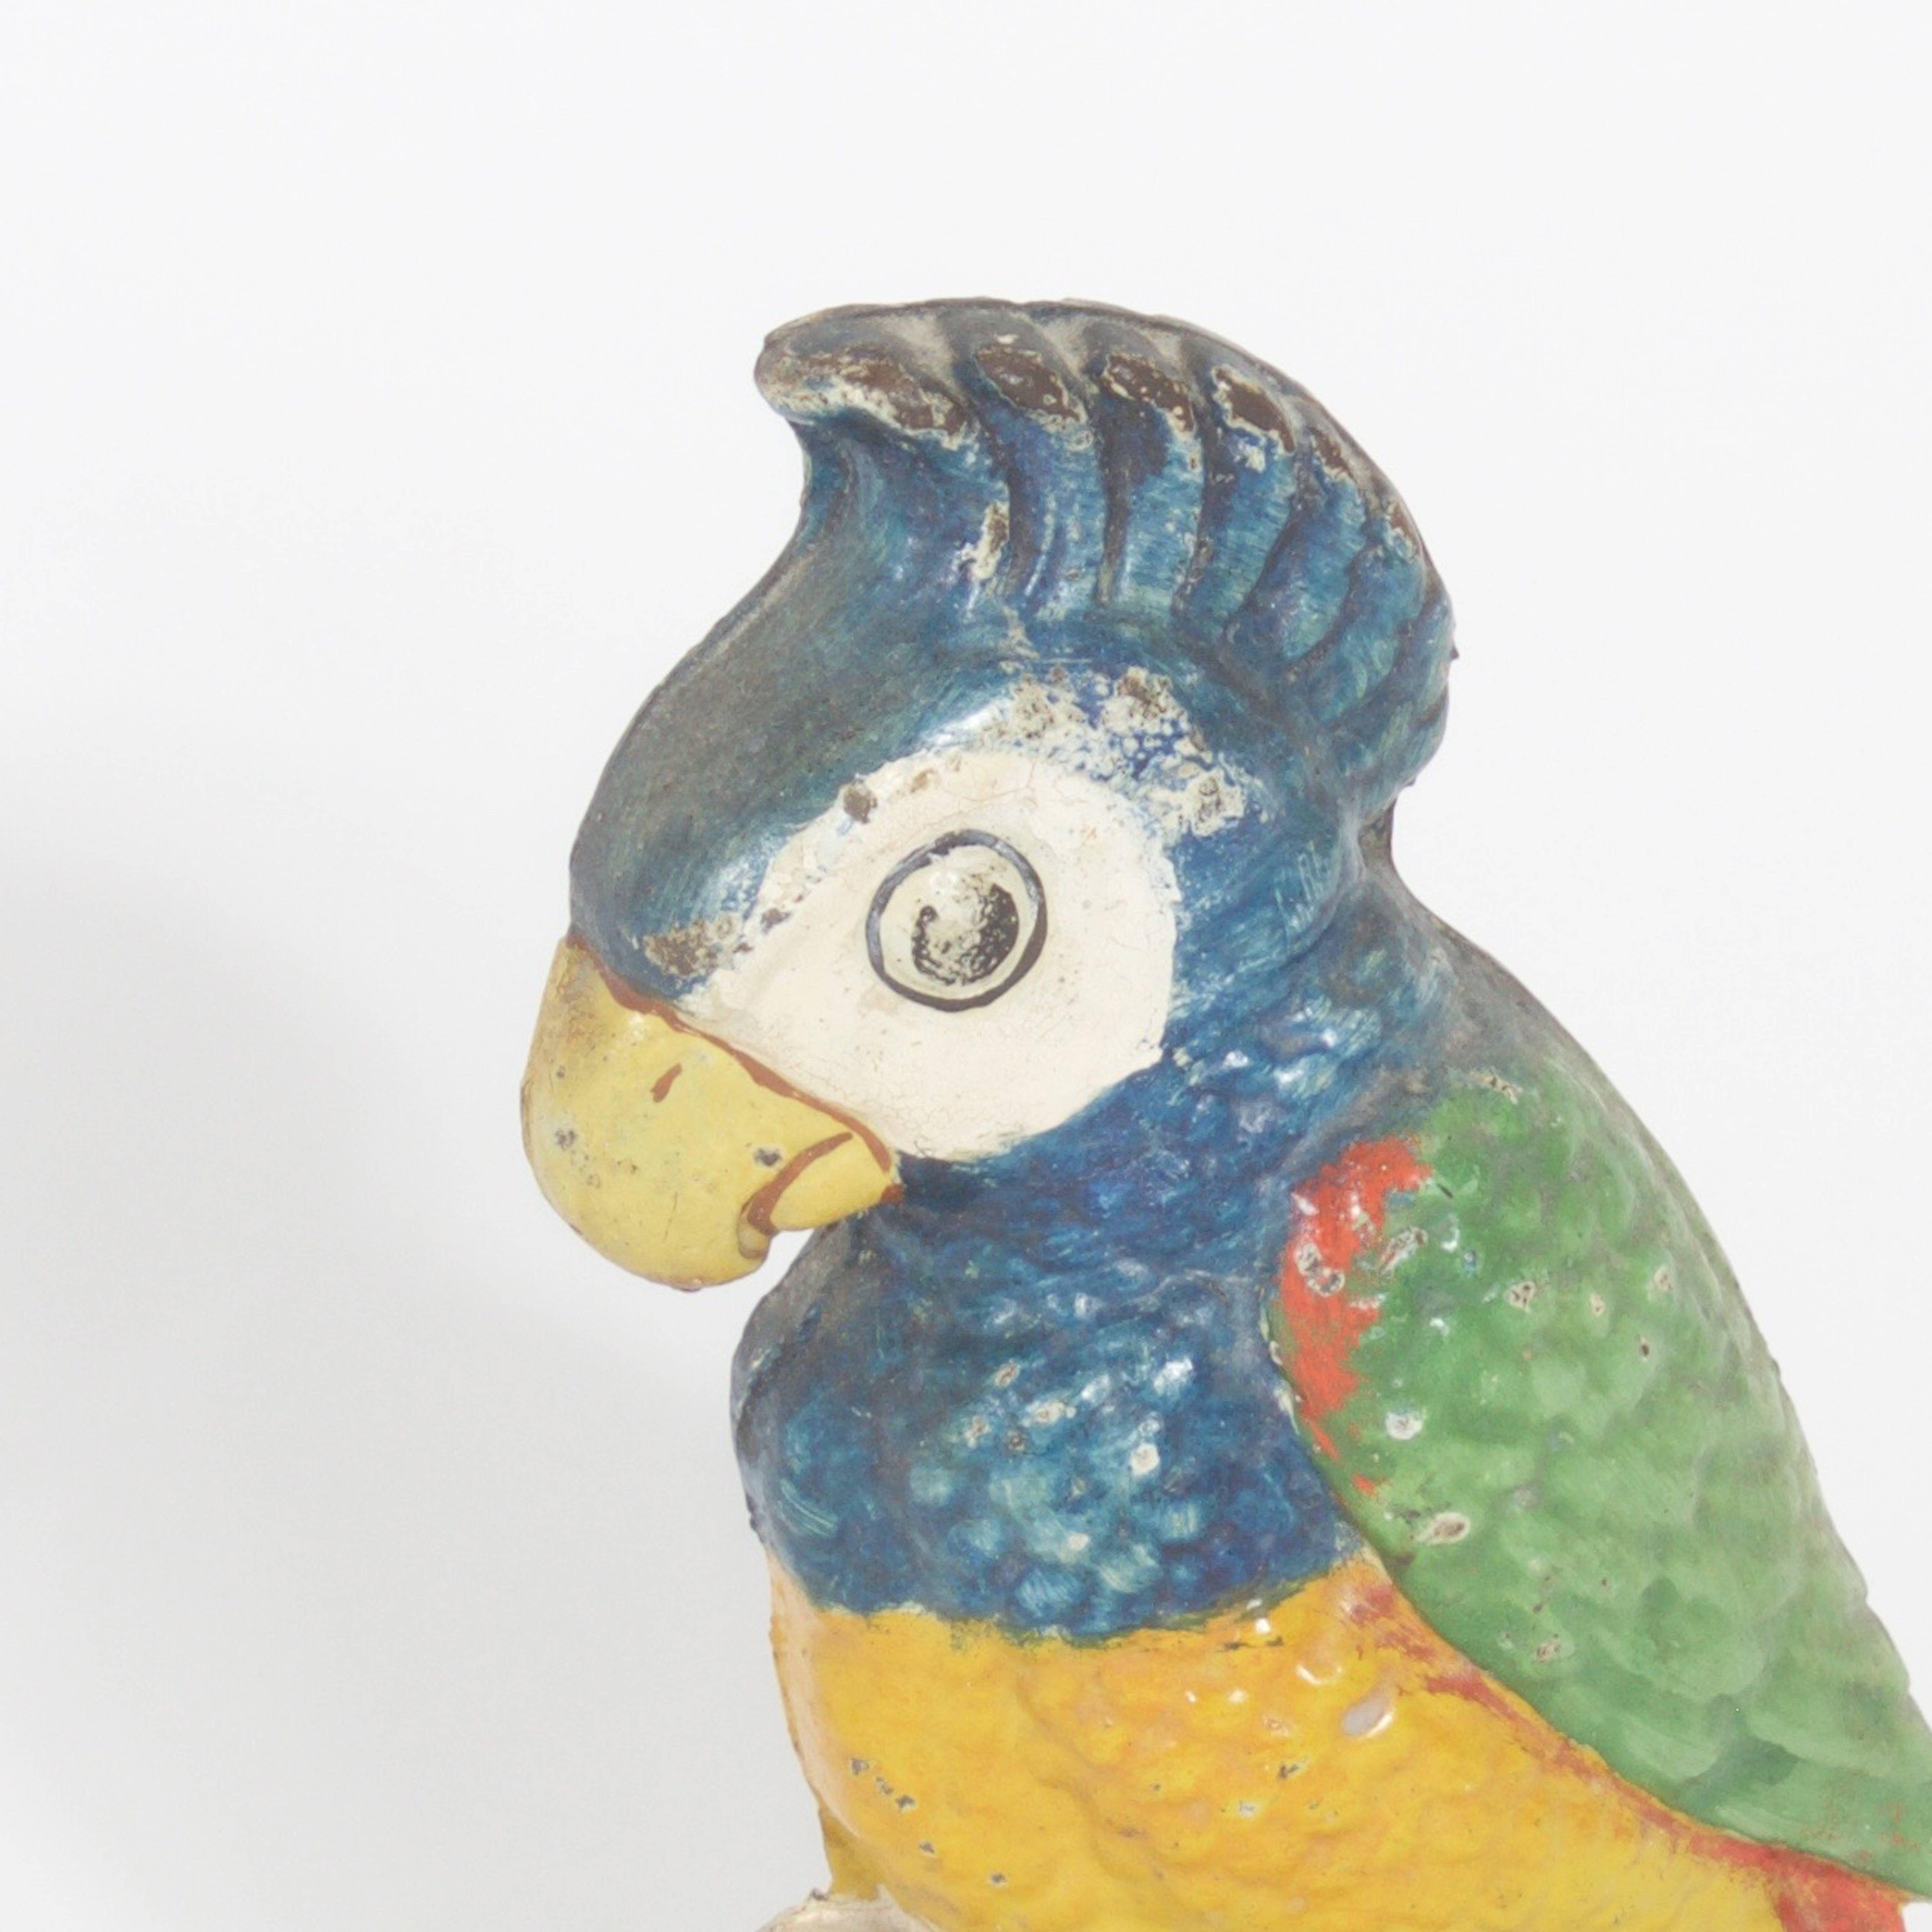 Cast iron parrot door stop retaining its original blue, green, yellow, red and white paint, having acquired an aged patina. This little parrot will be stopping doors for generations to come.